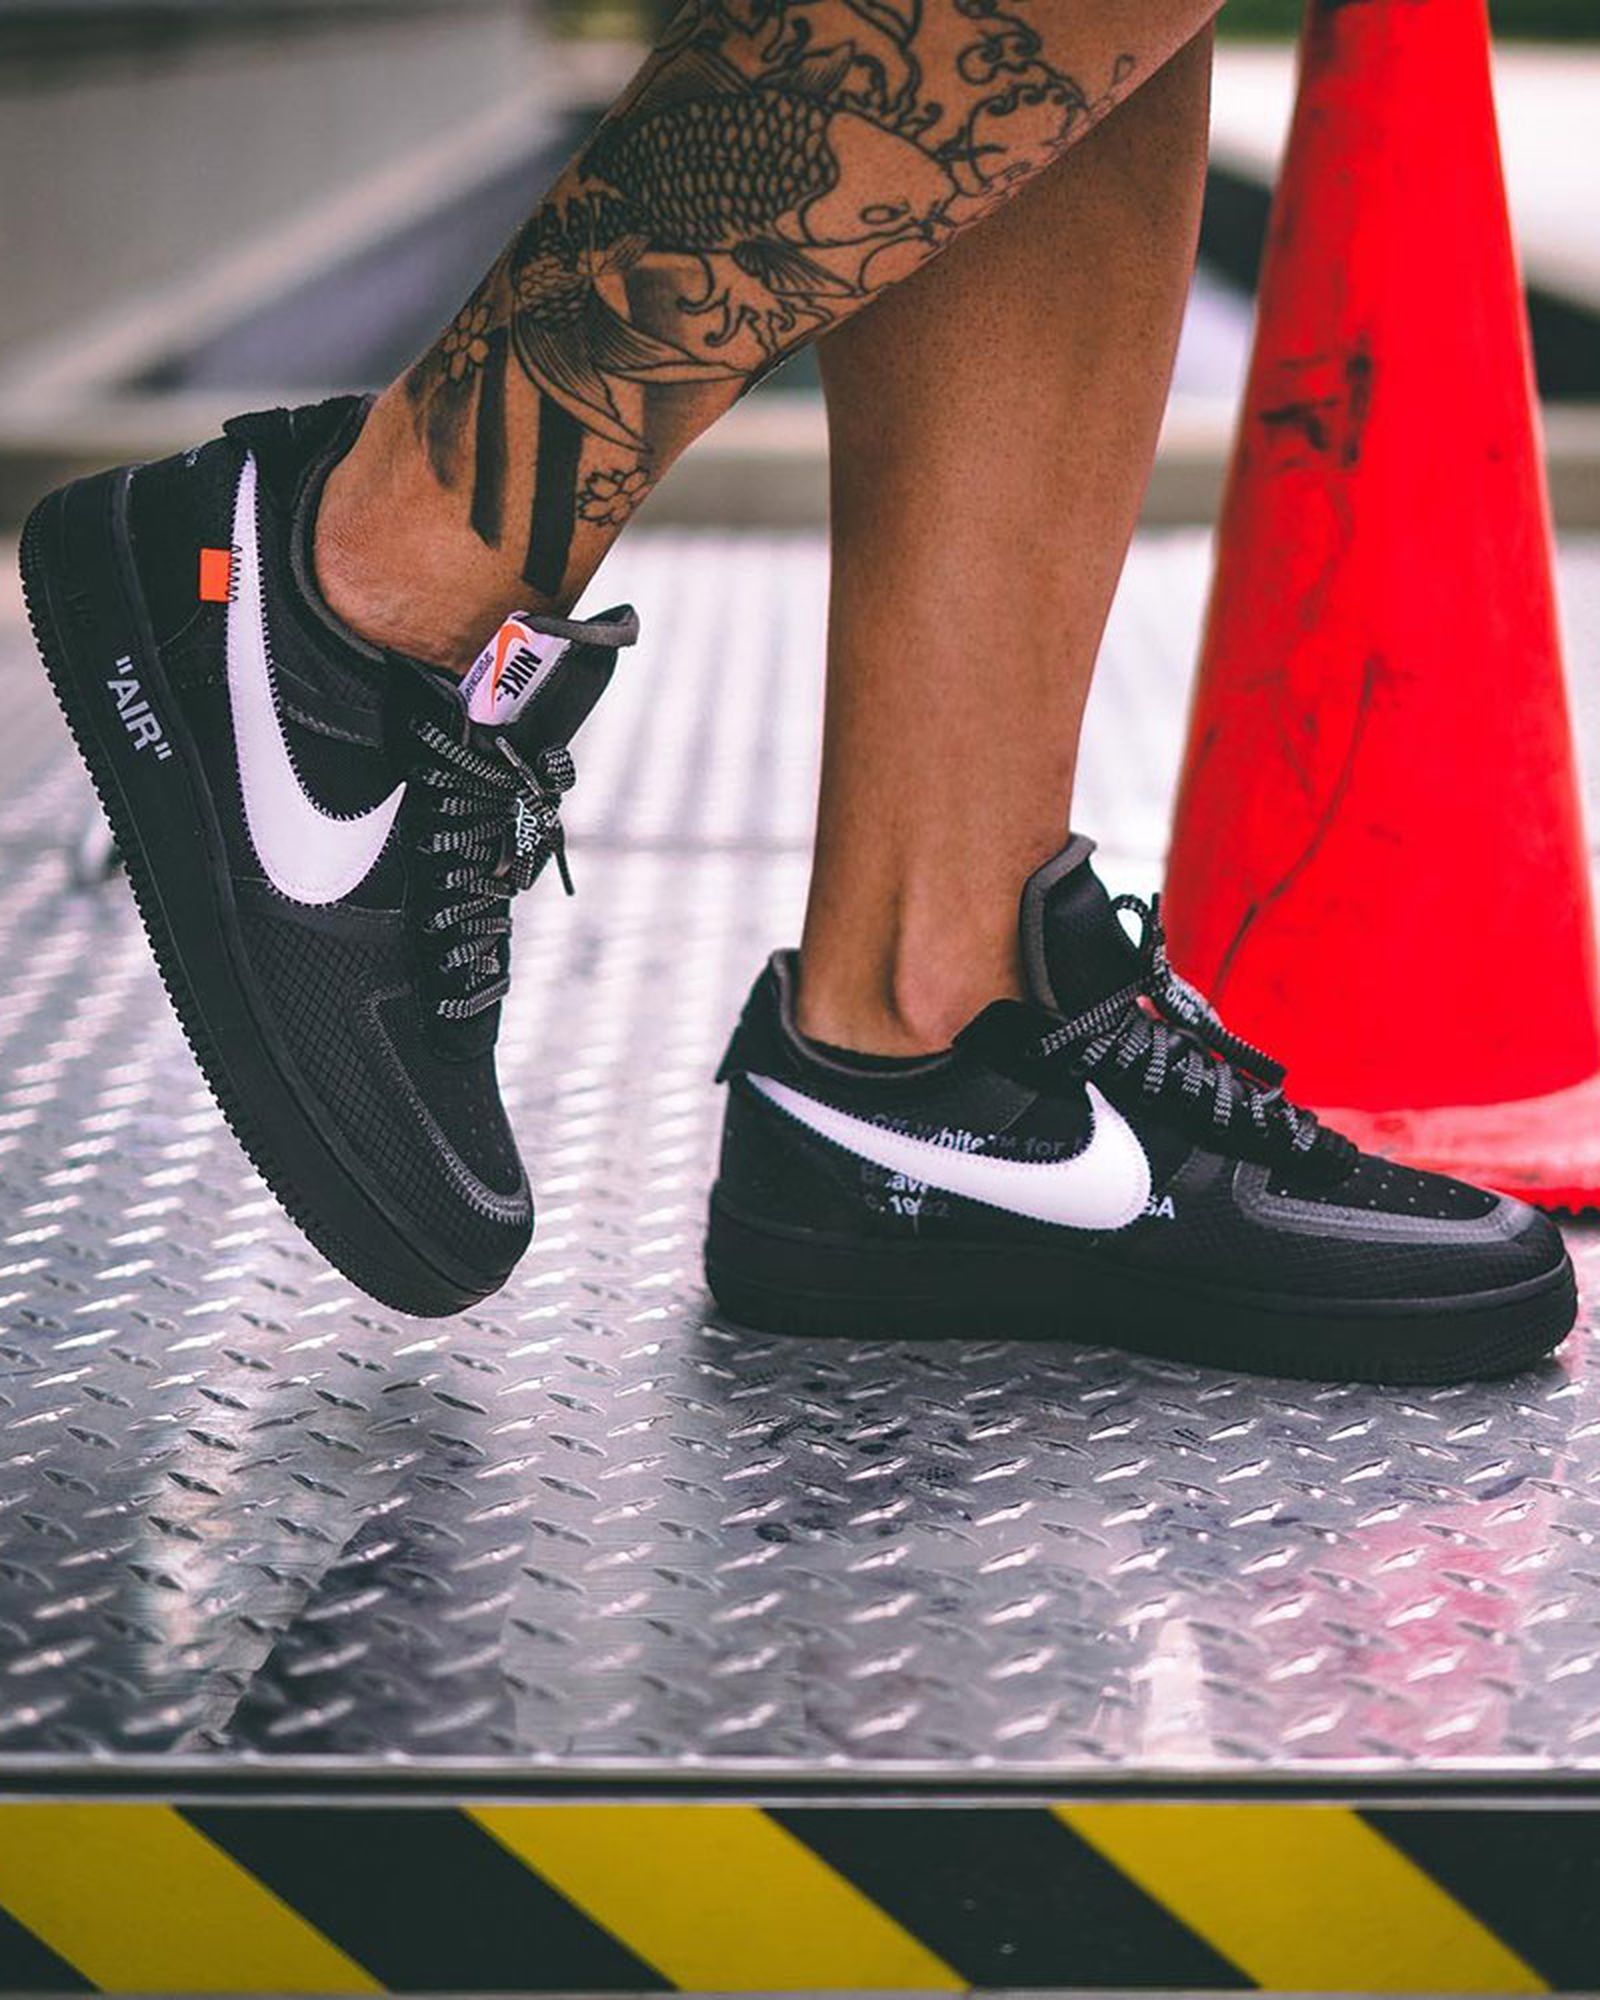 OFF-WHITE x af1 on feet Nike Air Force 1 “Black”: On-Foot Pictures Surfaced